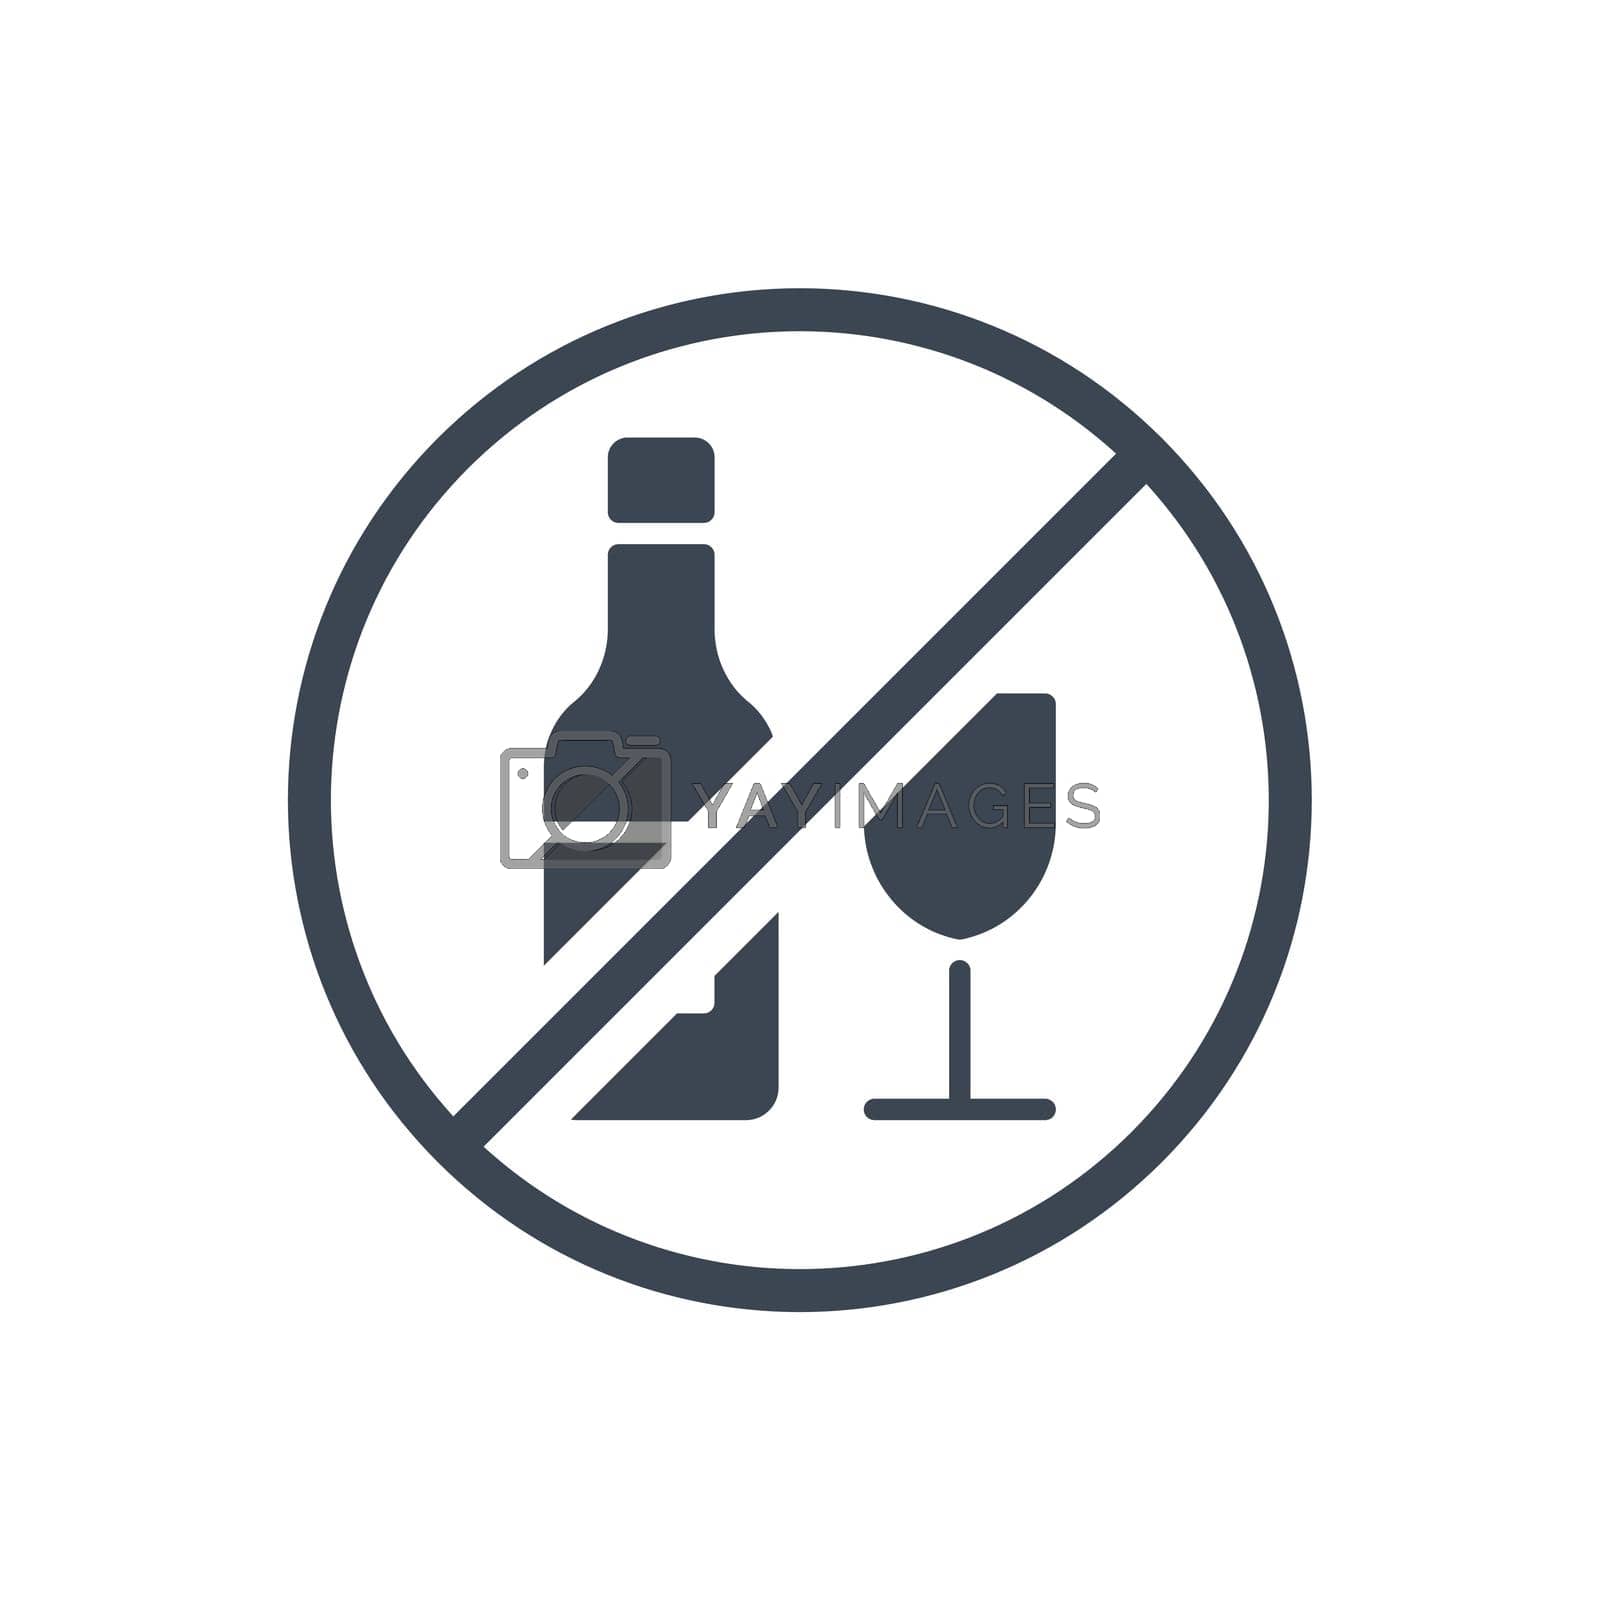 Royalty free image of No alcohol sign related vector glyph icon by smoki